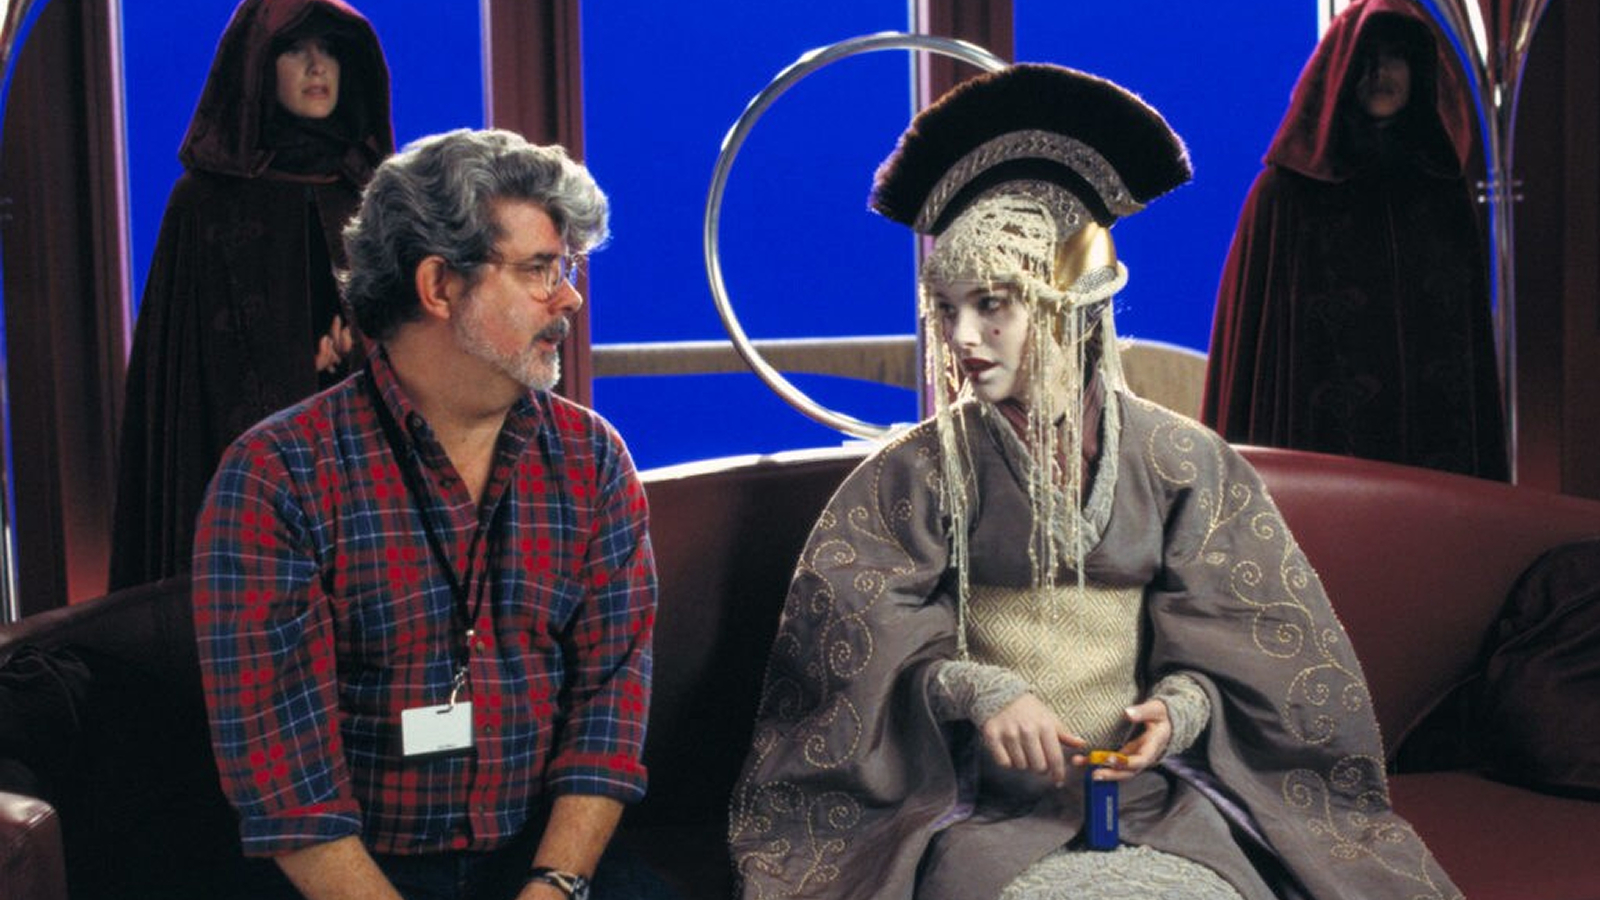 George Lucas and Natalie Portman in a Star Wars: The Phantom Menace behind-the-scenes still